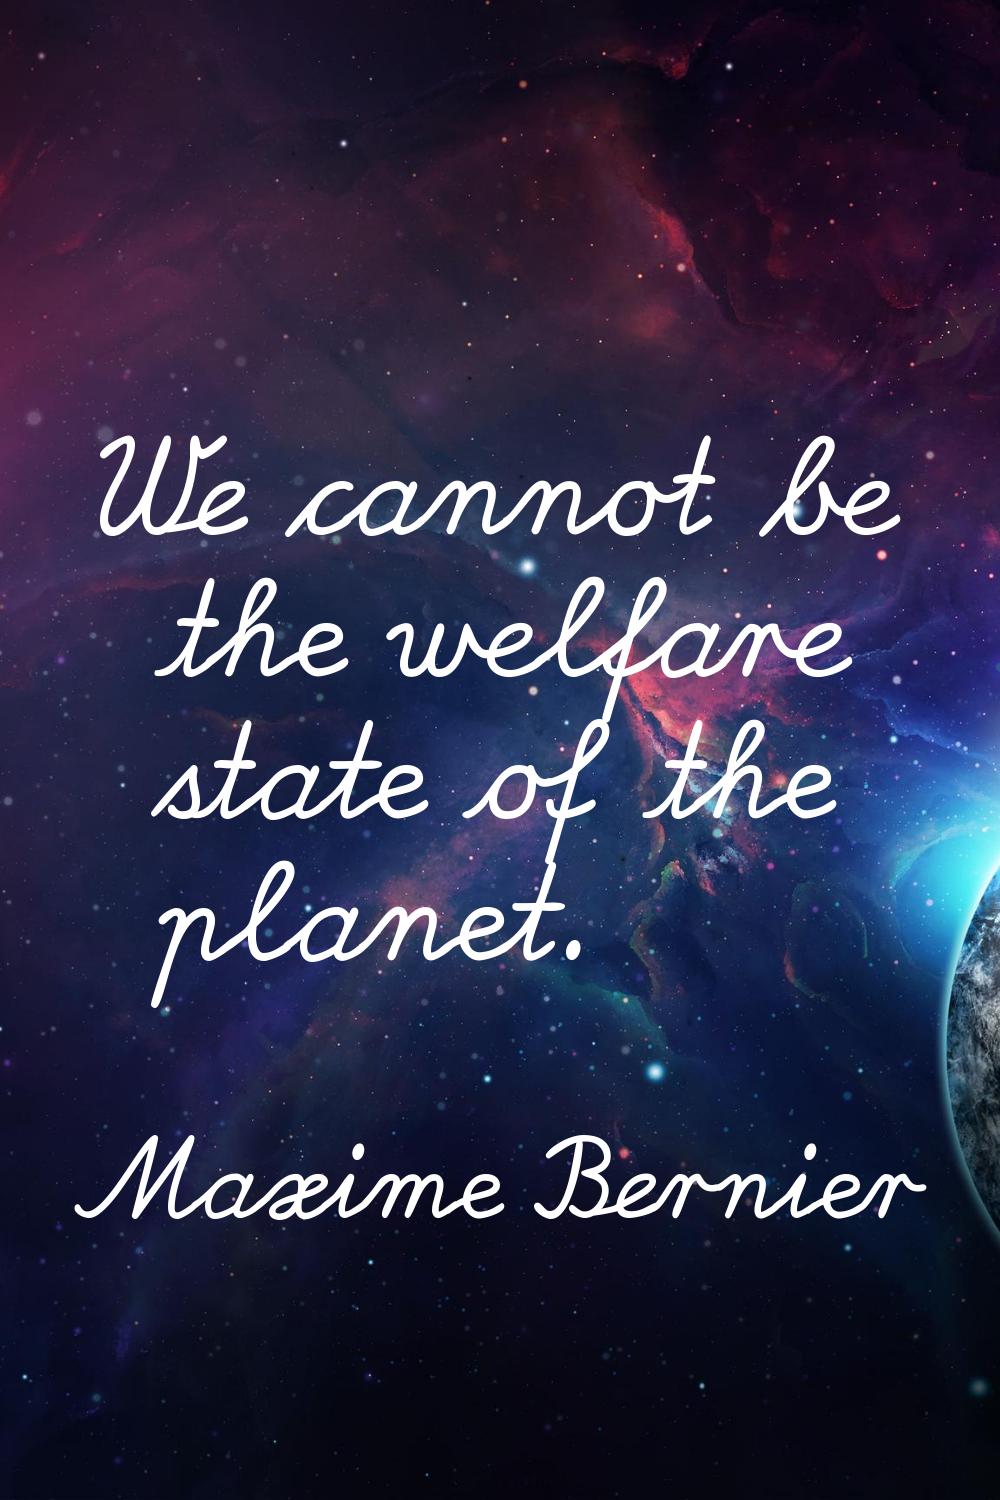 We cannot be the welfare state of the planet.